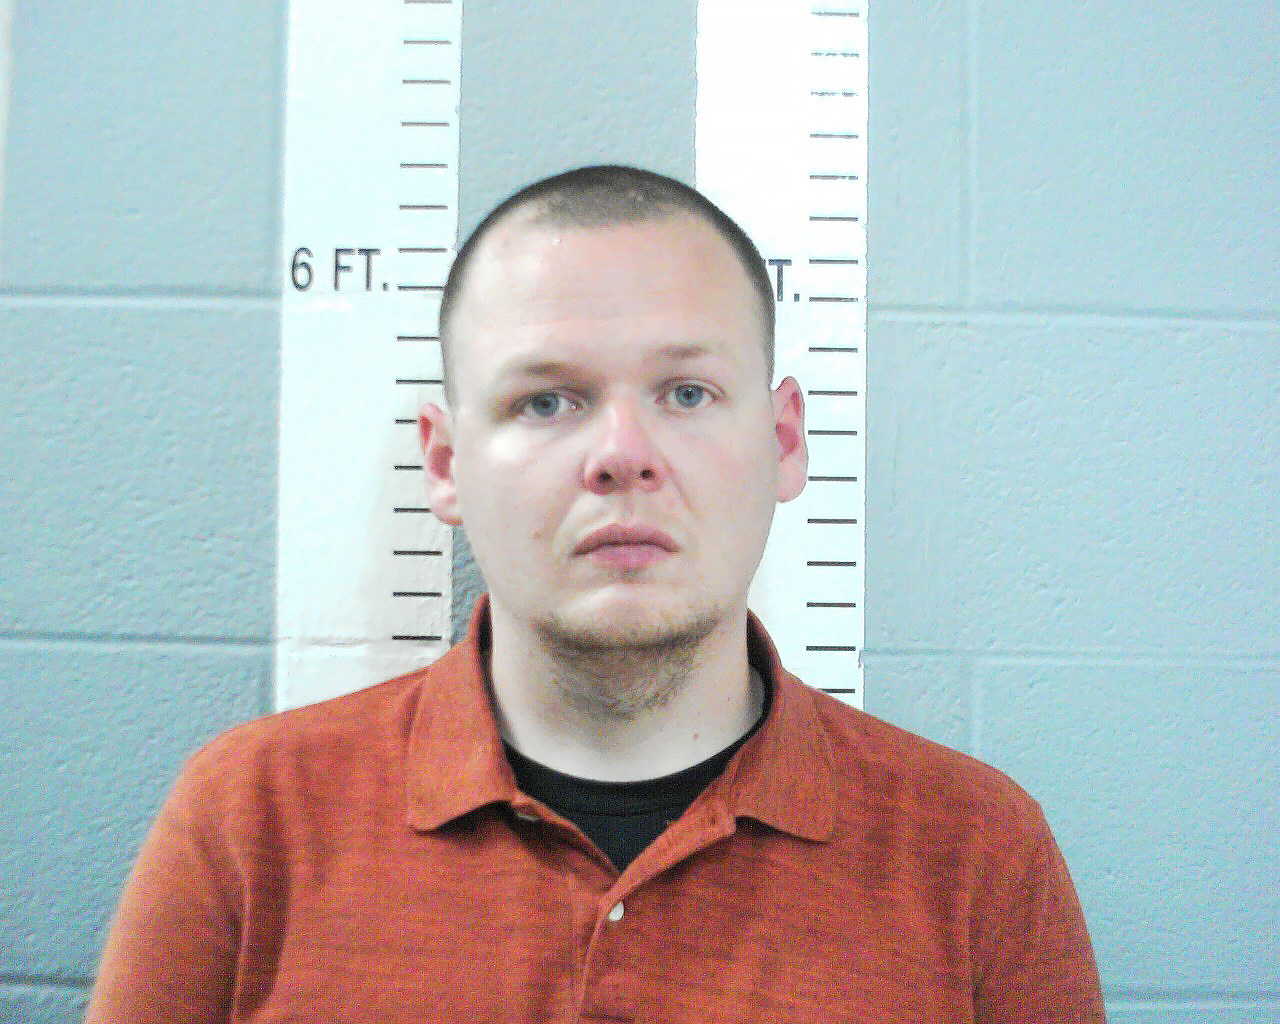 PHOTO: Joshua Taylor, 25, of the Wilson Police Department in Oklahoma is charged in connection to the second-degree murder of Jared Lakey.